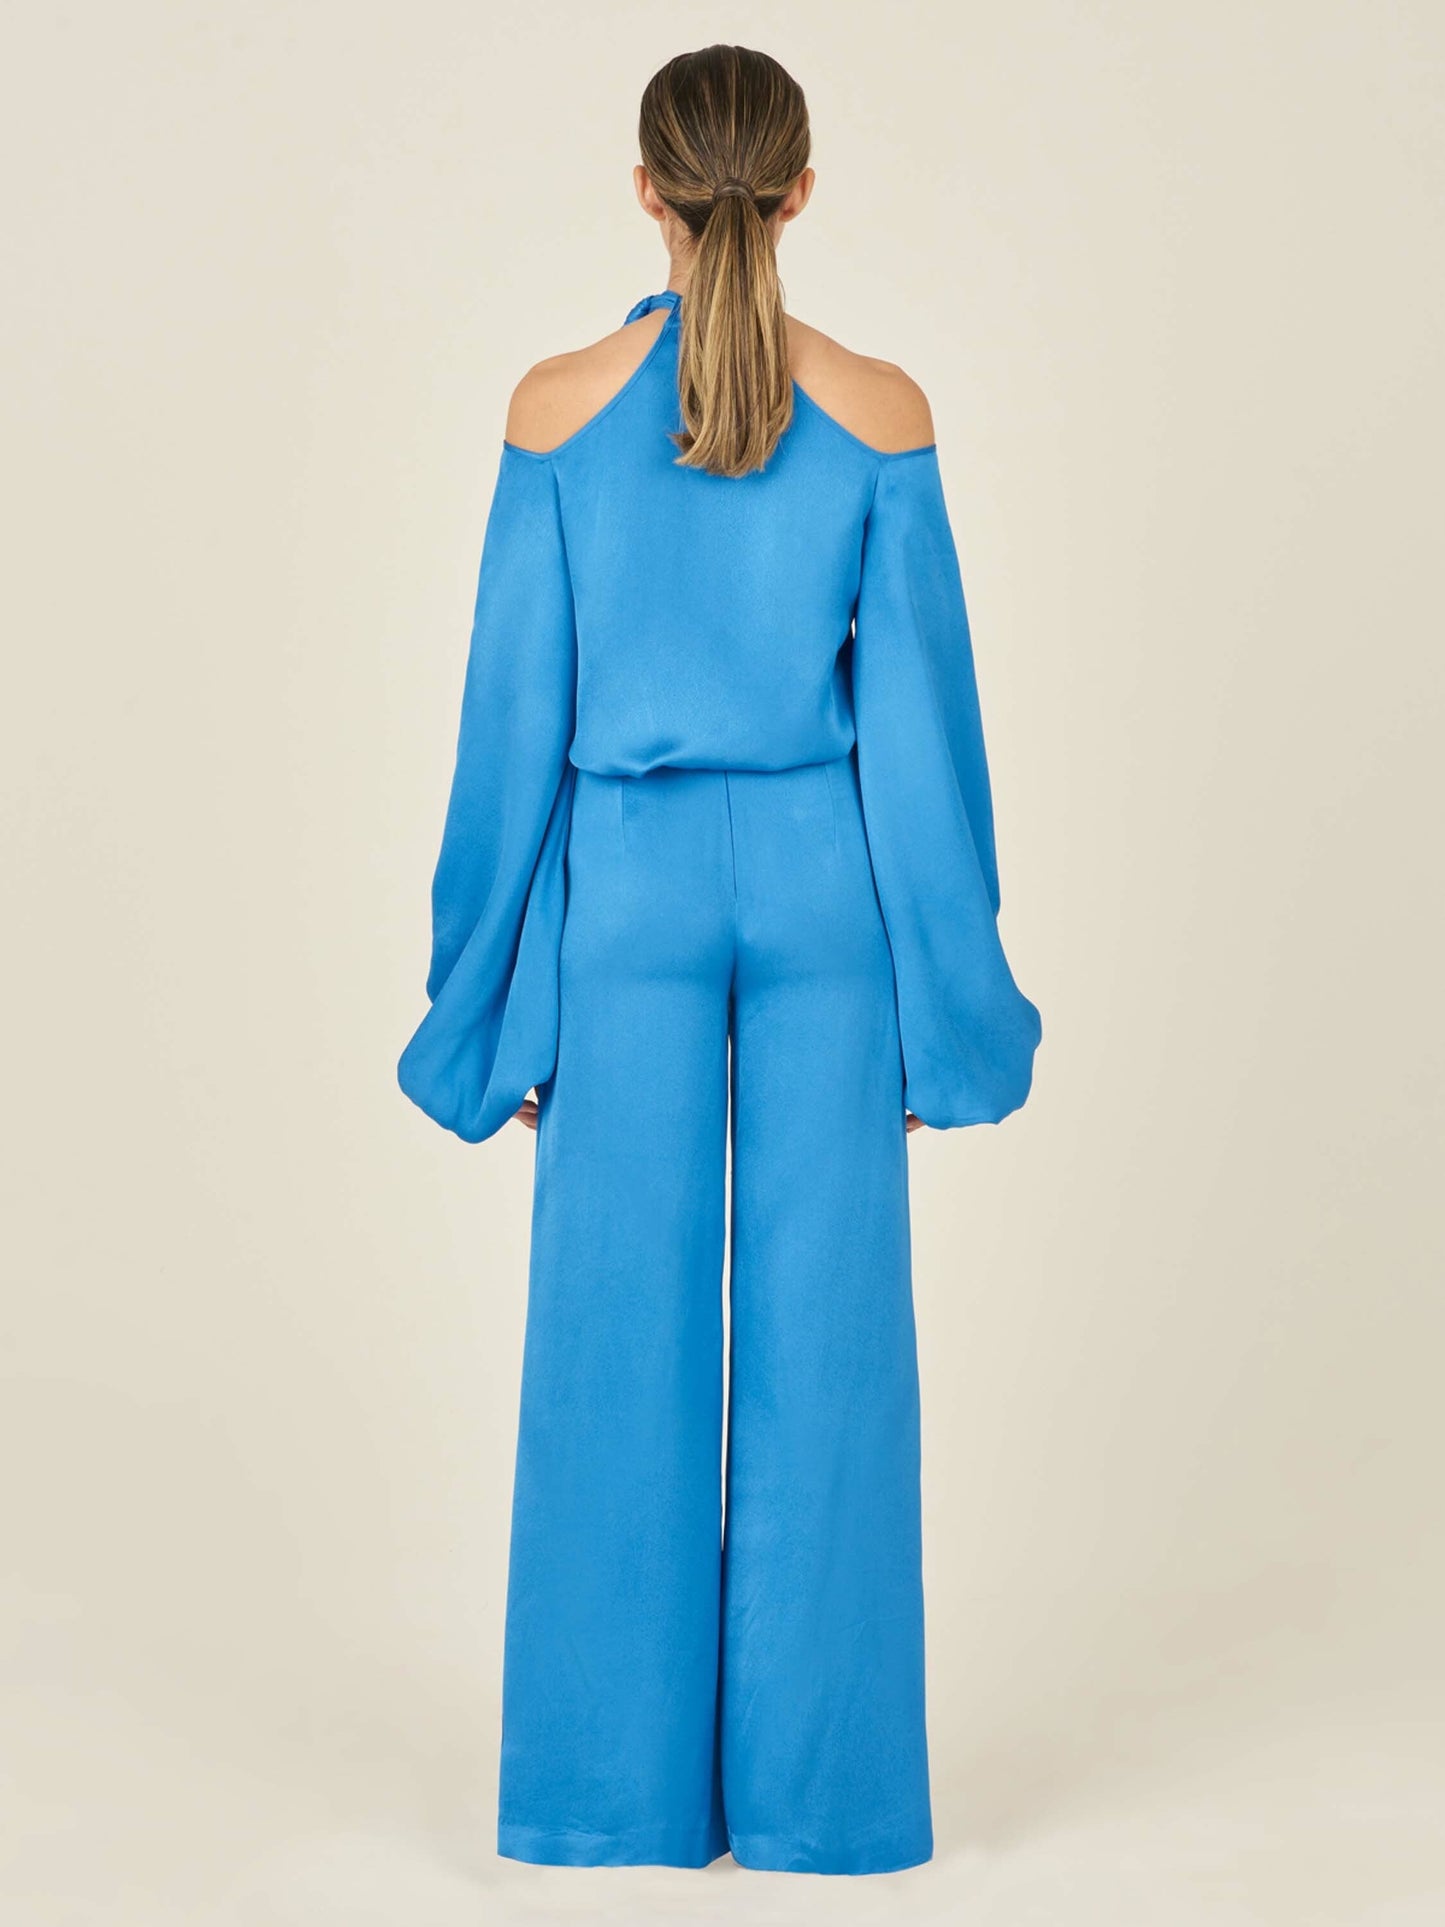 The Ludovica Blouse Blue with a bow on the shoulder, please allow one week for order to ship.